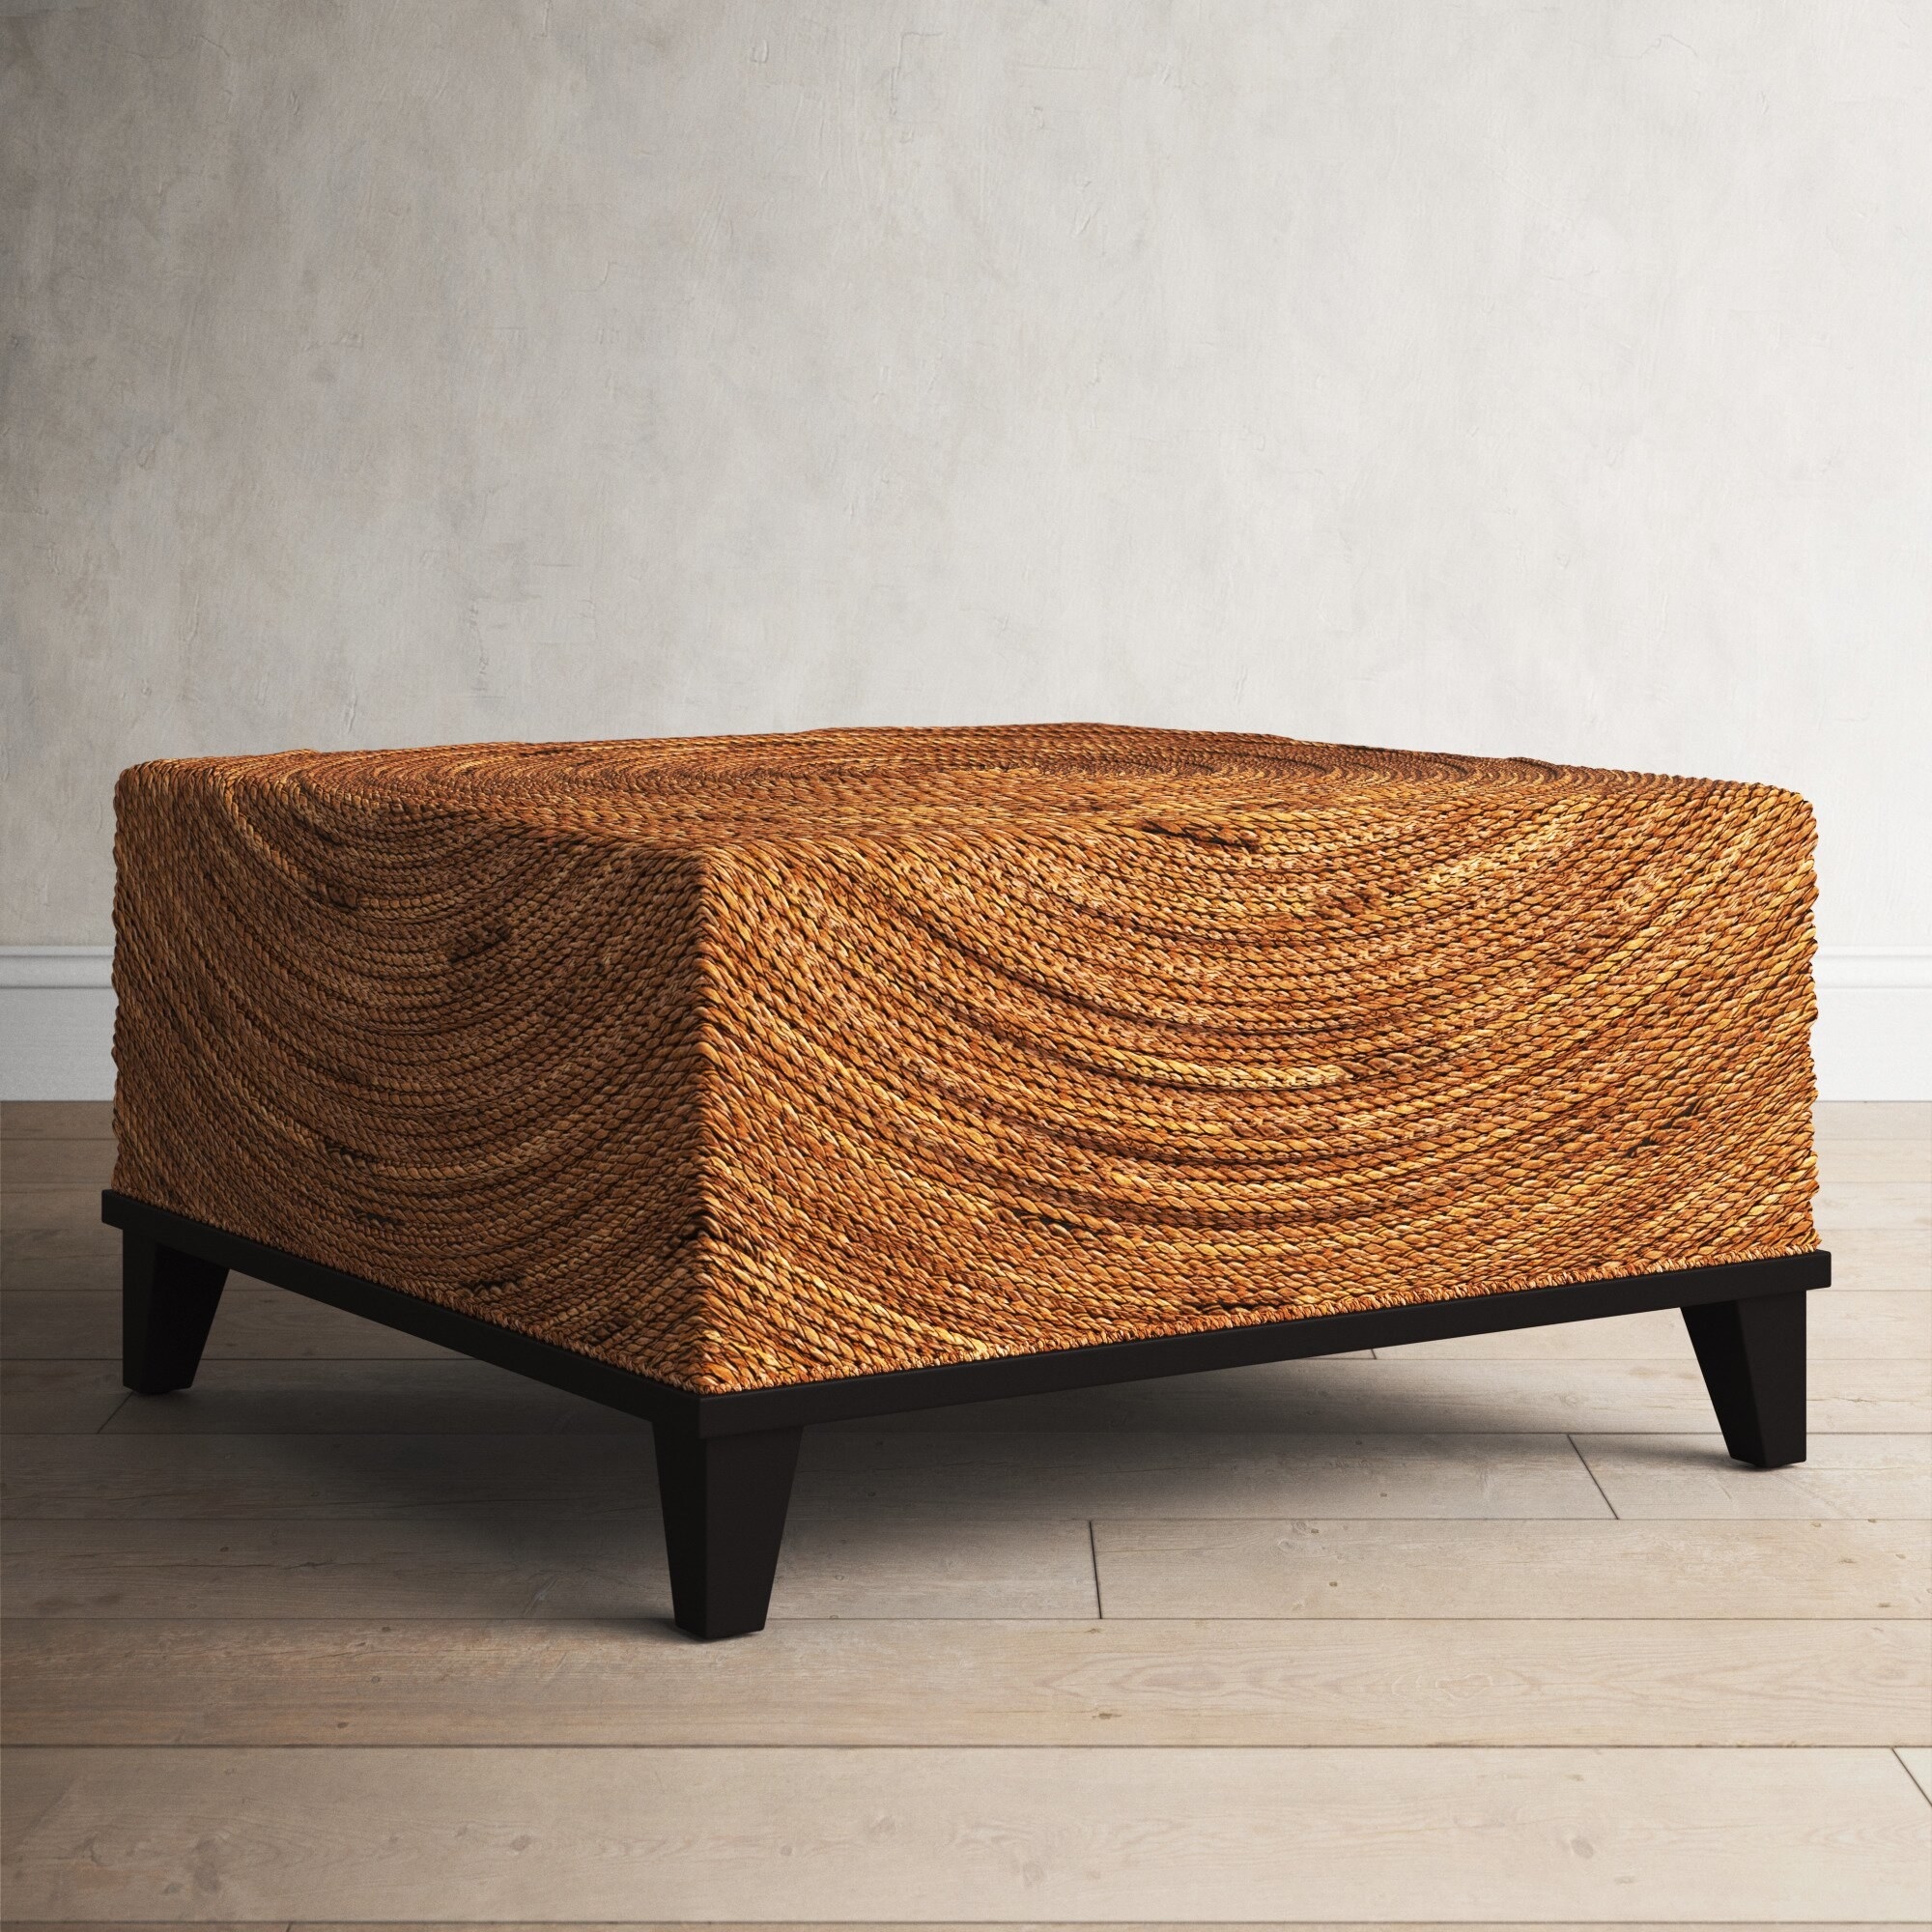 A rattan-type braided coffee table.